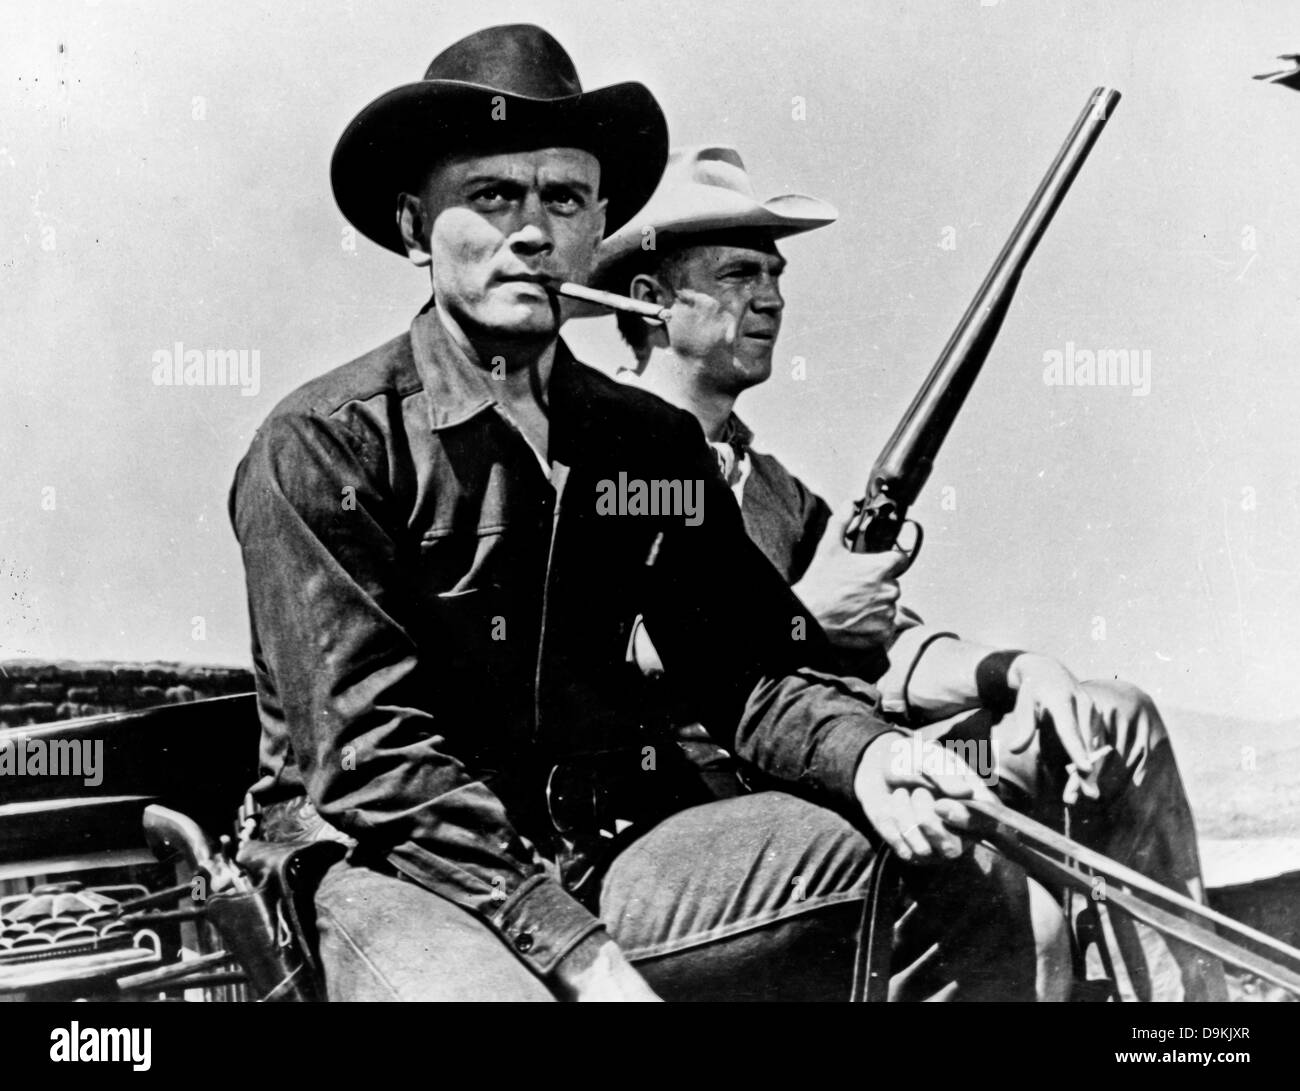 The Magnificent Seven,Yul Brynner,Steve McQueen,1960 Stock Photo